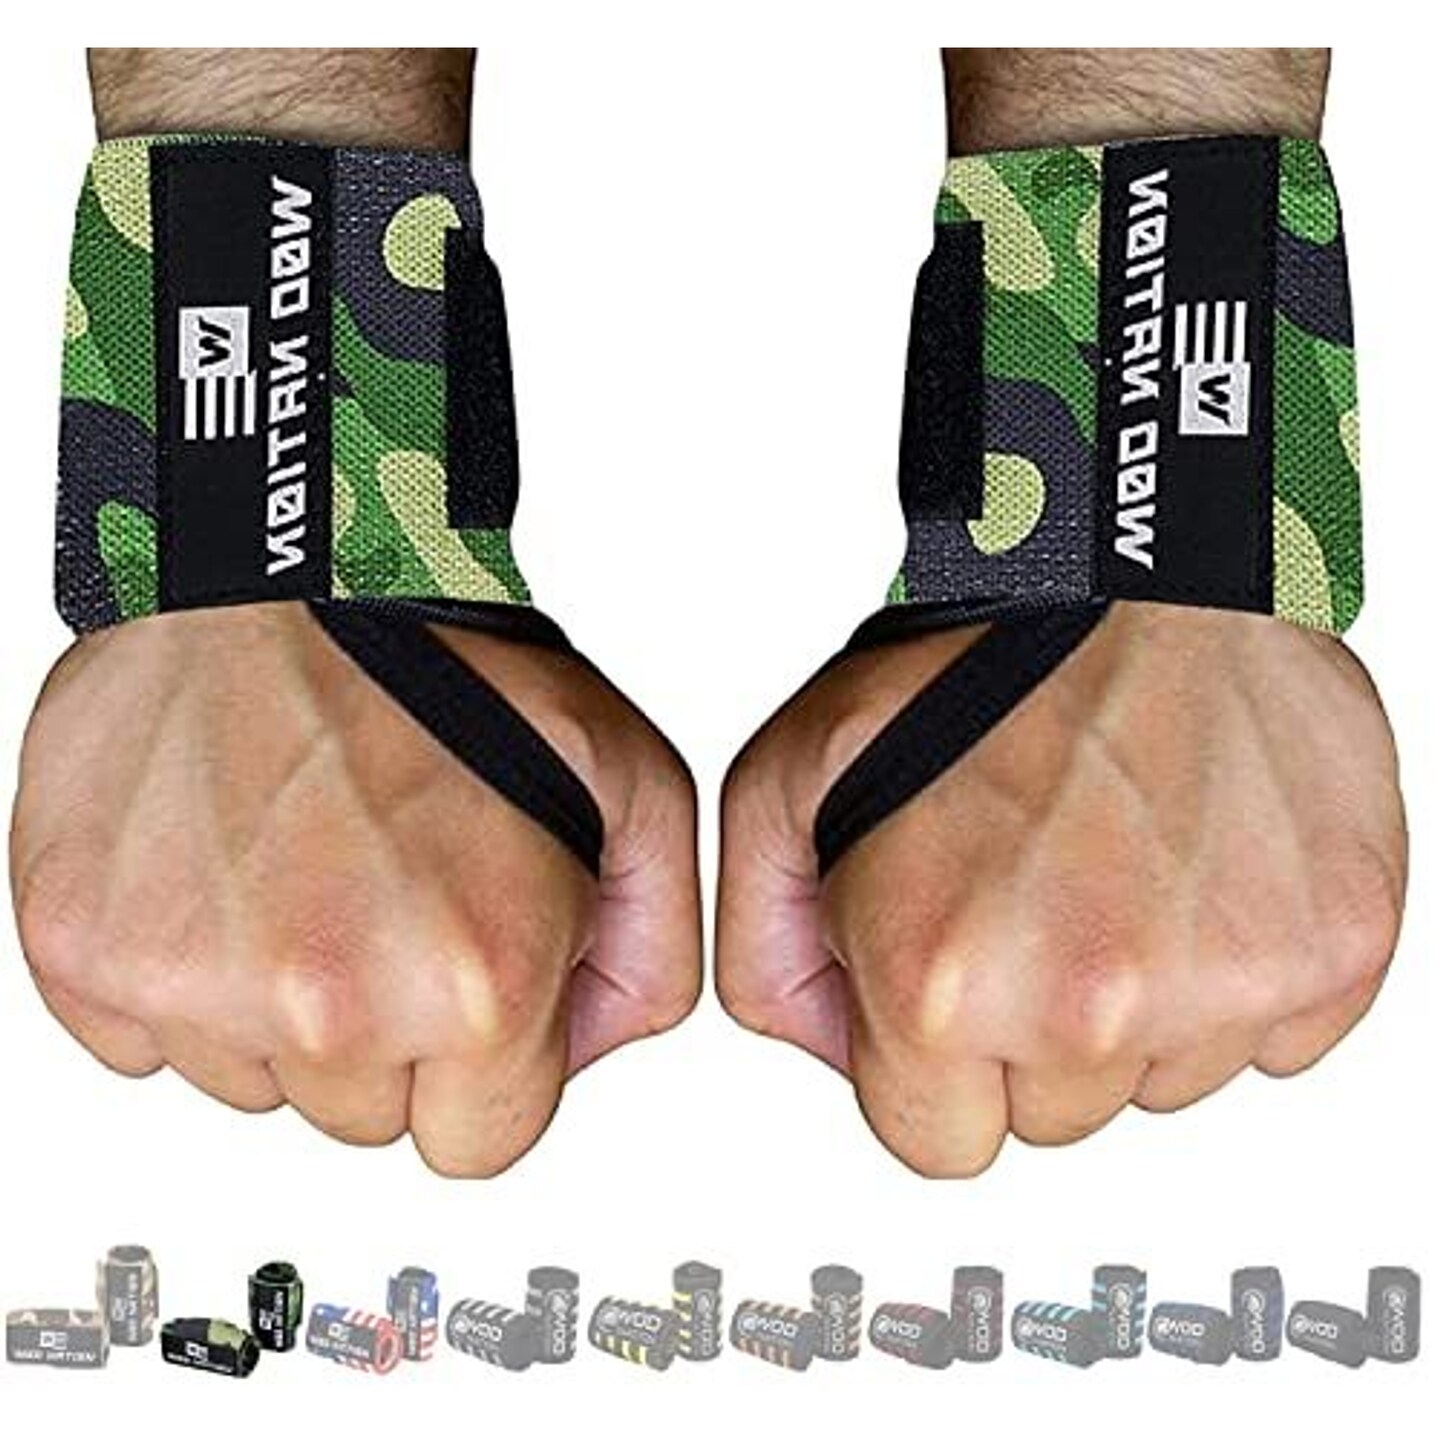 WOD Nation Wrist Wraps &#x26; Straps for Gym &#x26; Weightlifting (18 inch) - Essential Weight Lifting Wrist Wraps &#x26; Gym Wrist Straps Support for Optimal Powerlifting Performance For Women &#x26; Men - Green Camo